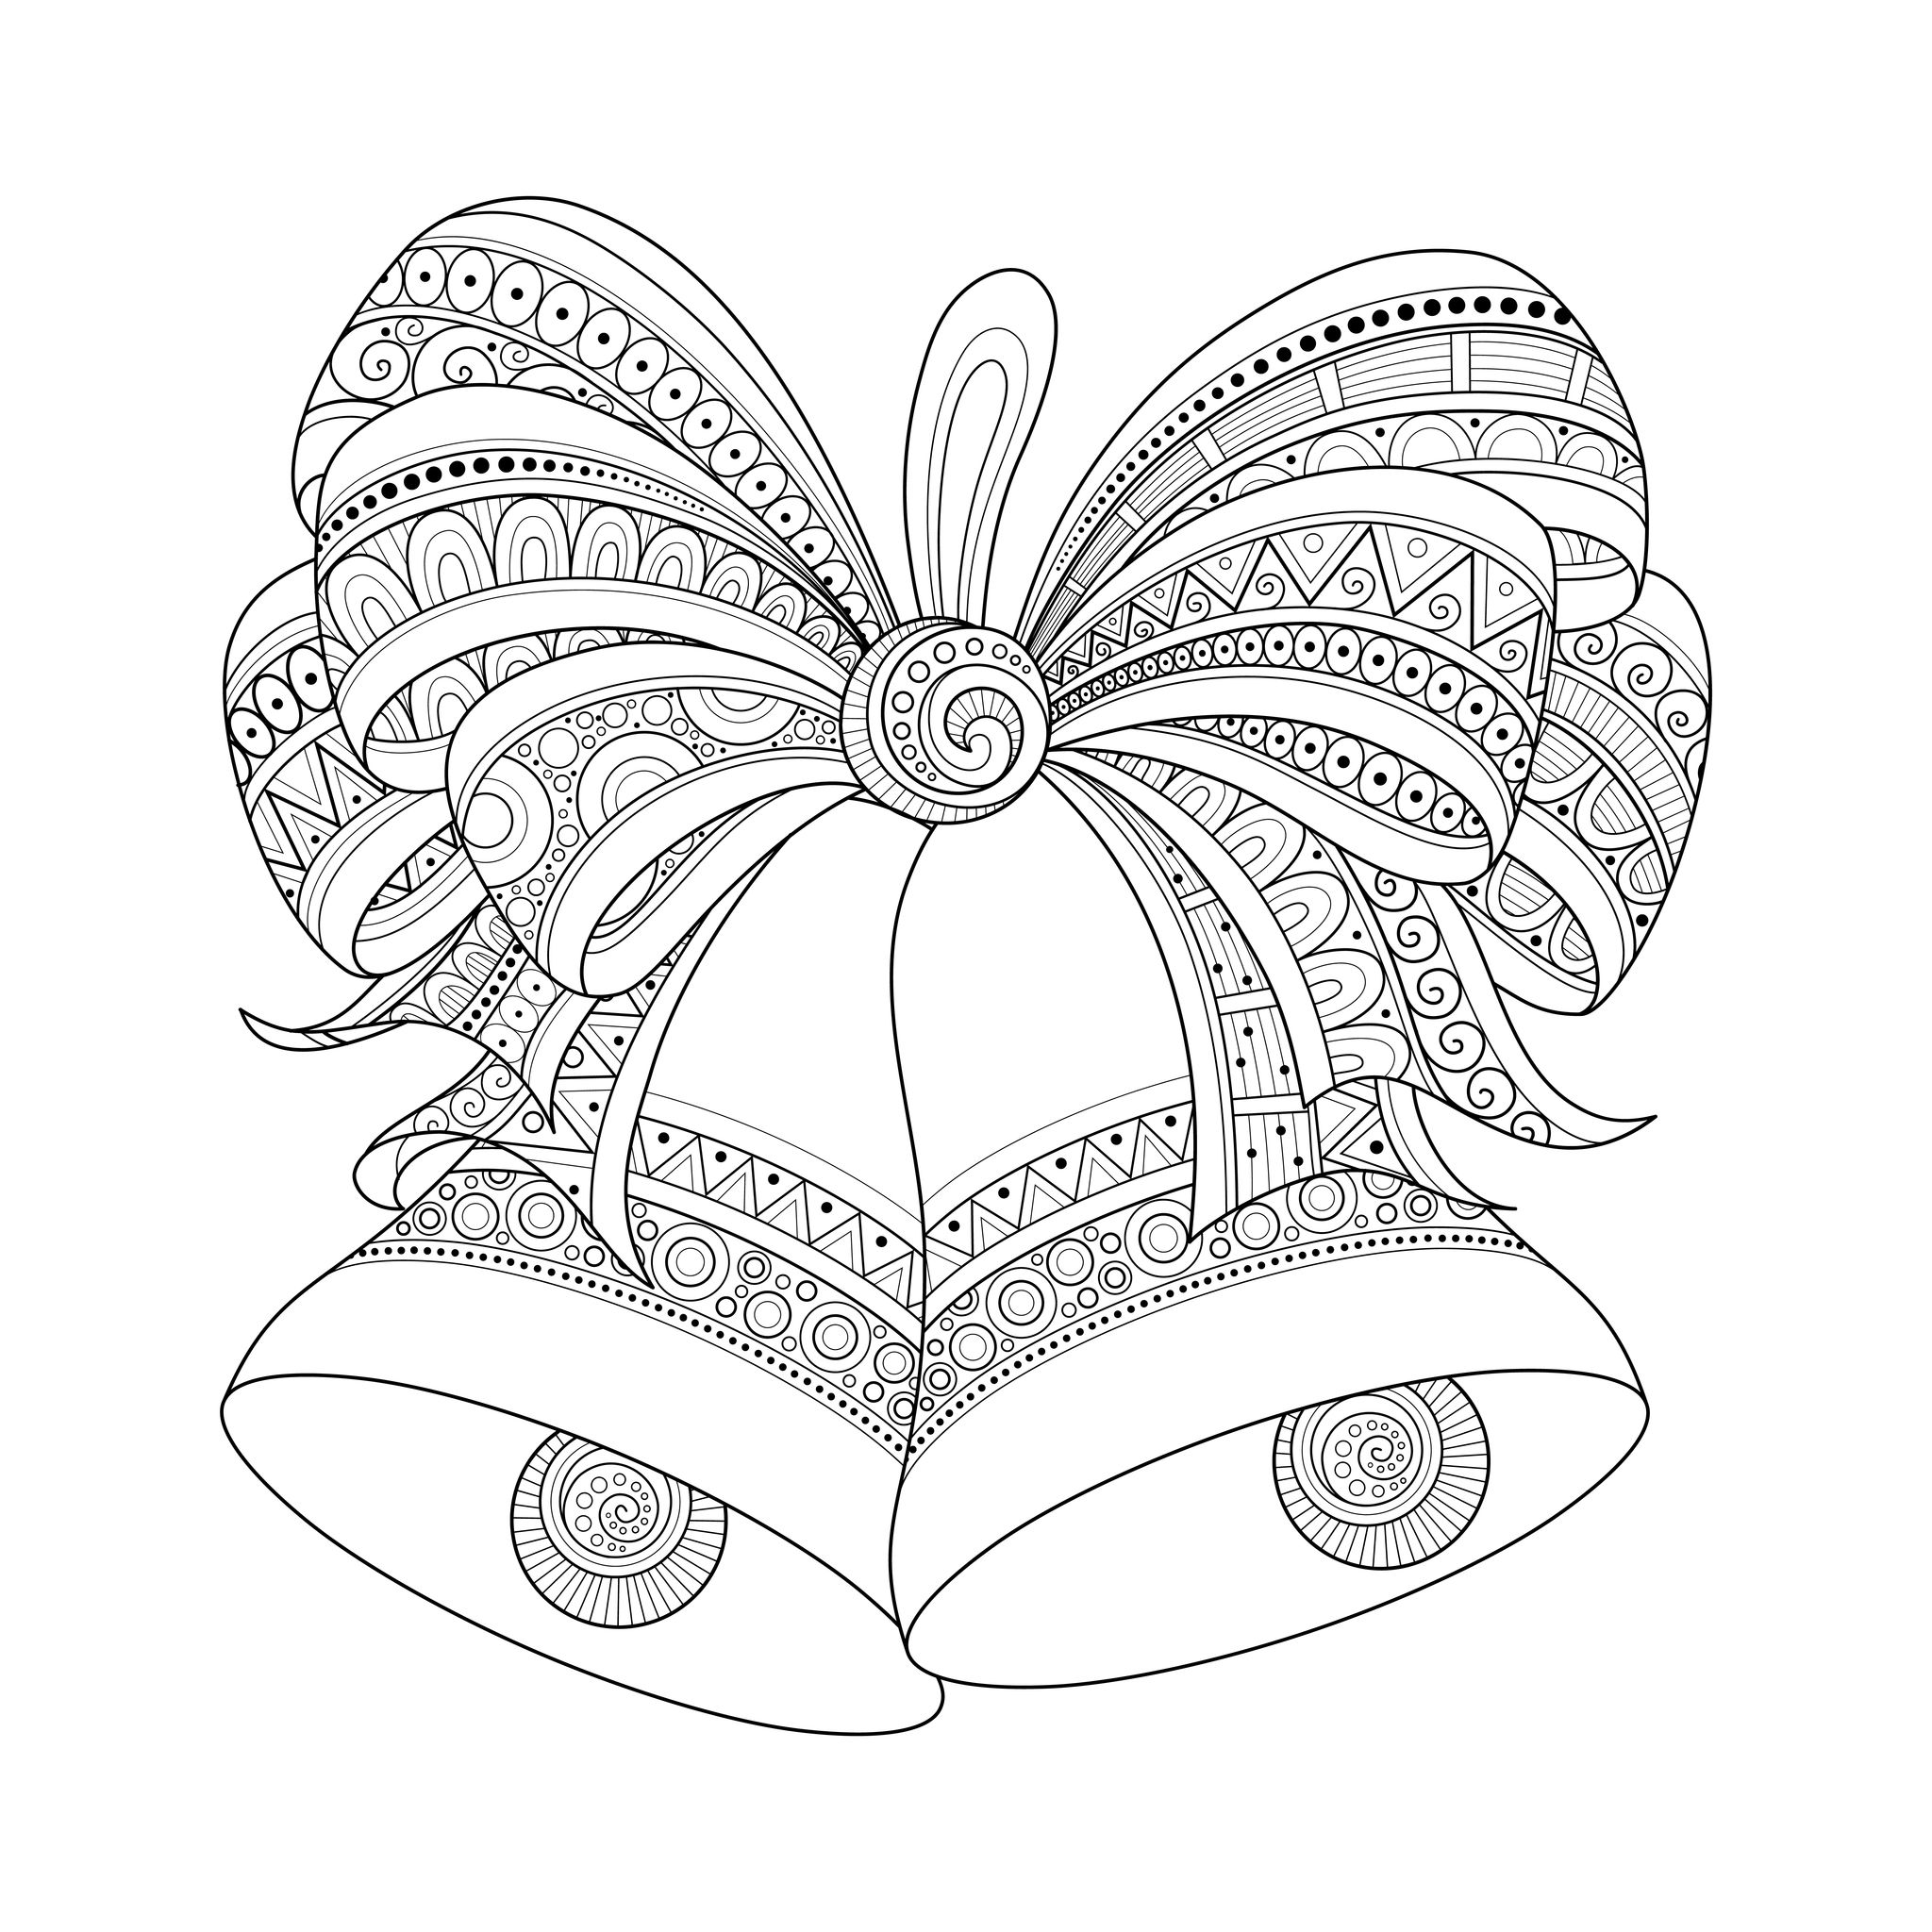 Zentangle Coloring Pages For Christmas - Christmas Coloring ...